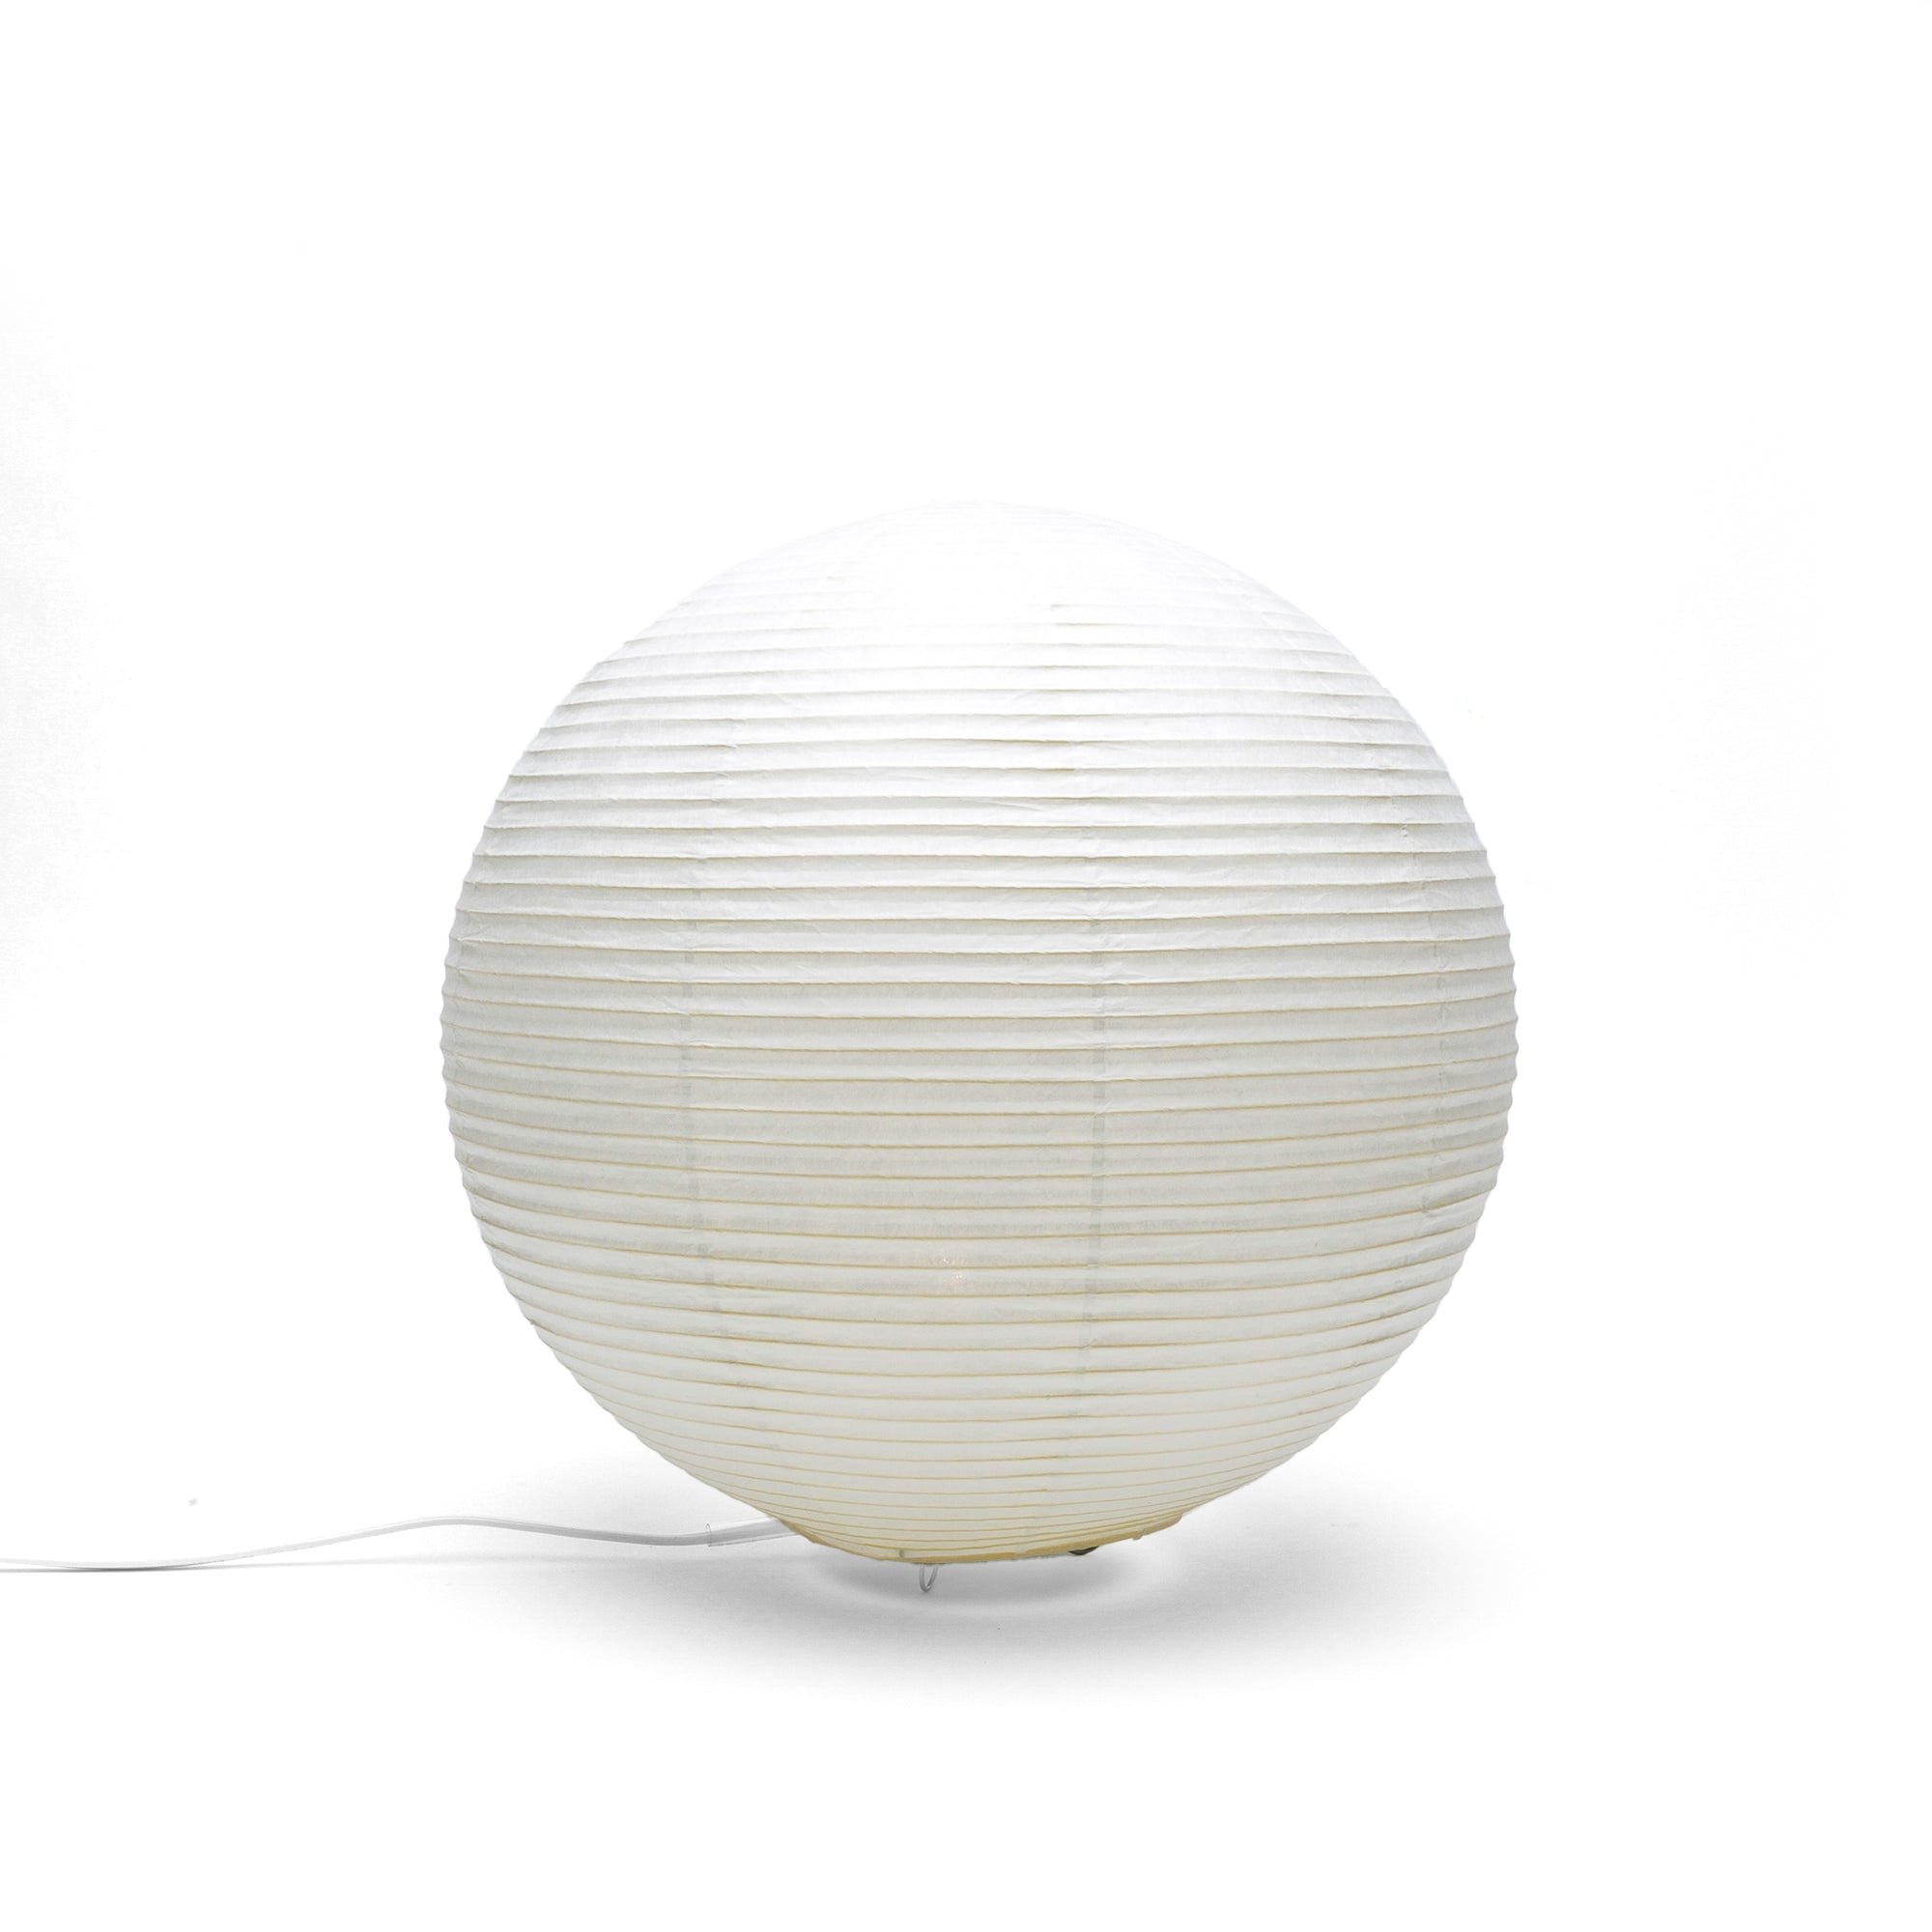 The Sphere - Paper Moon Table Lamp, No. 5